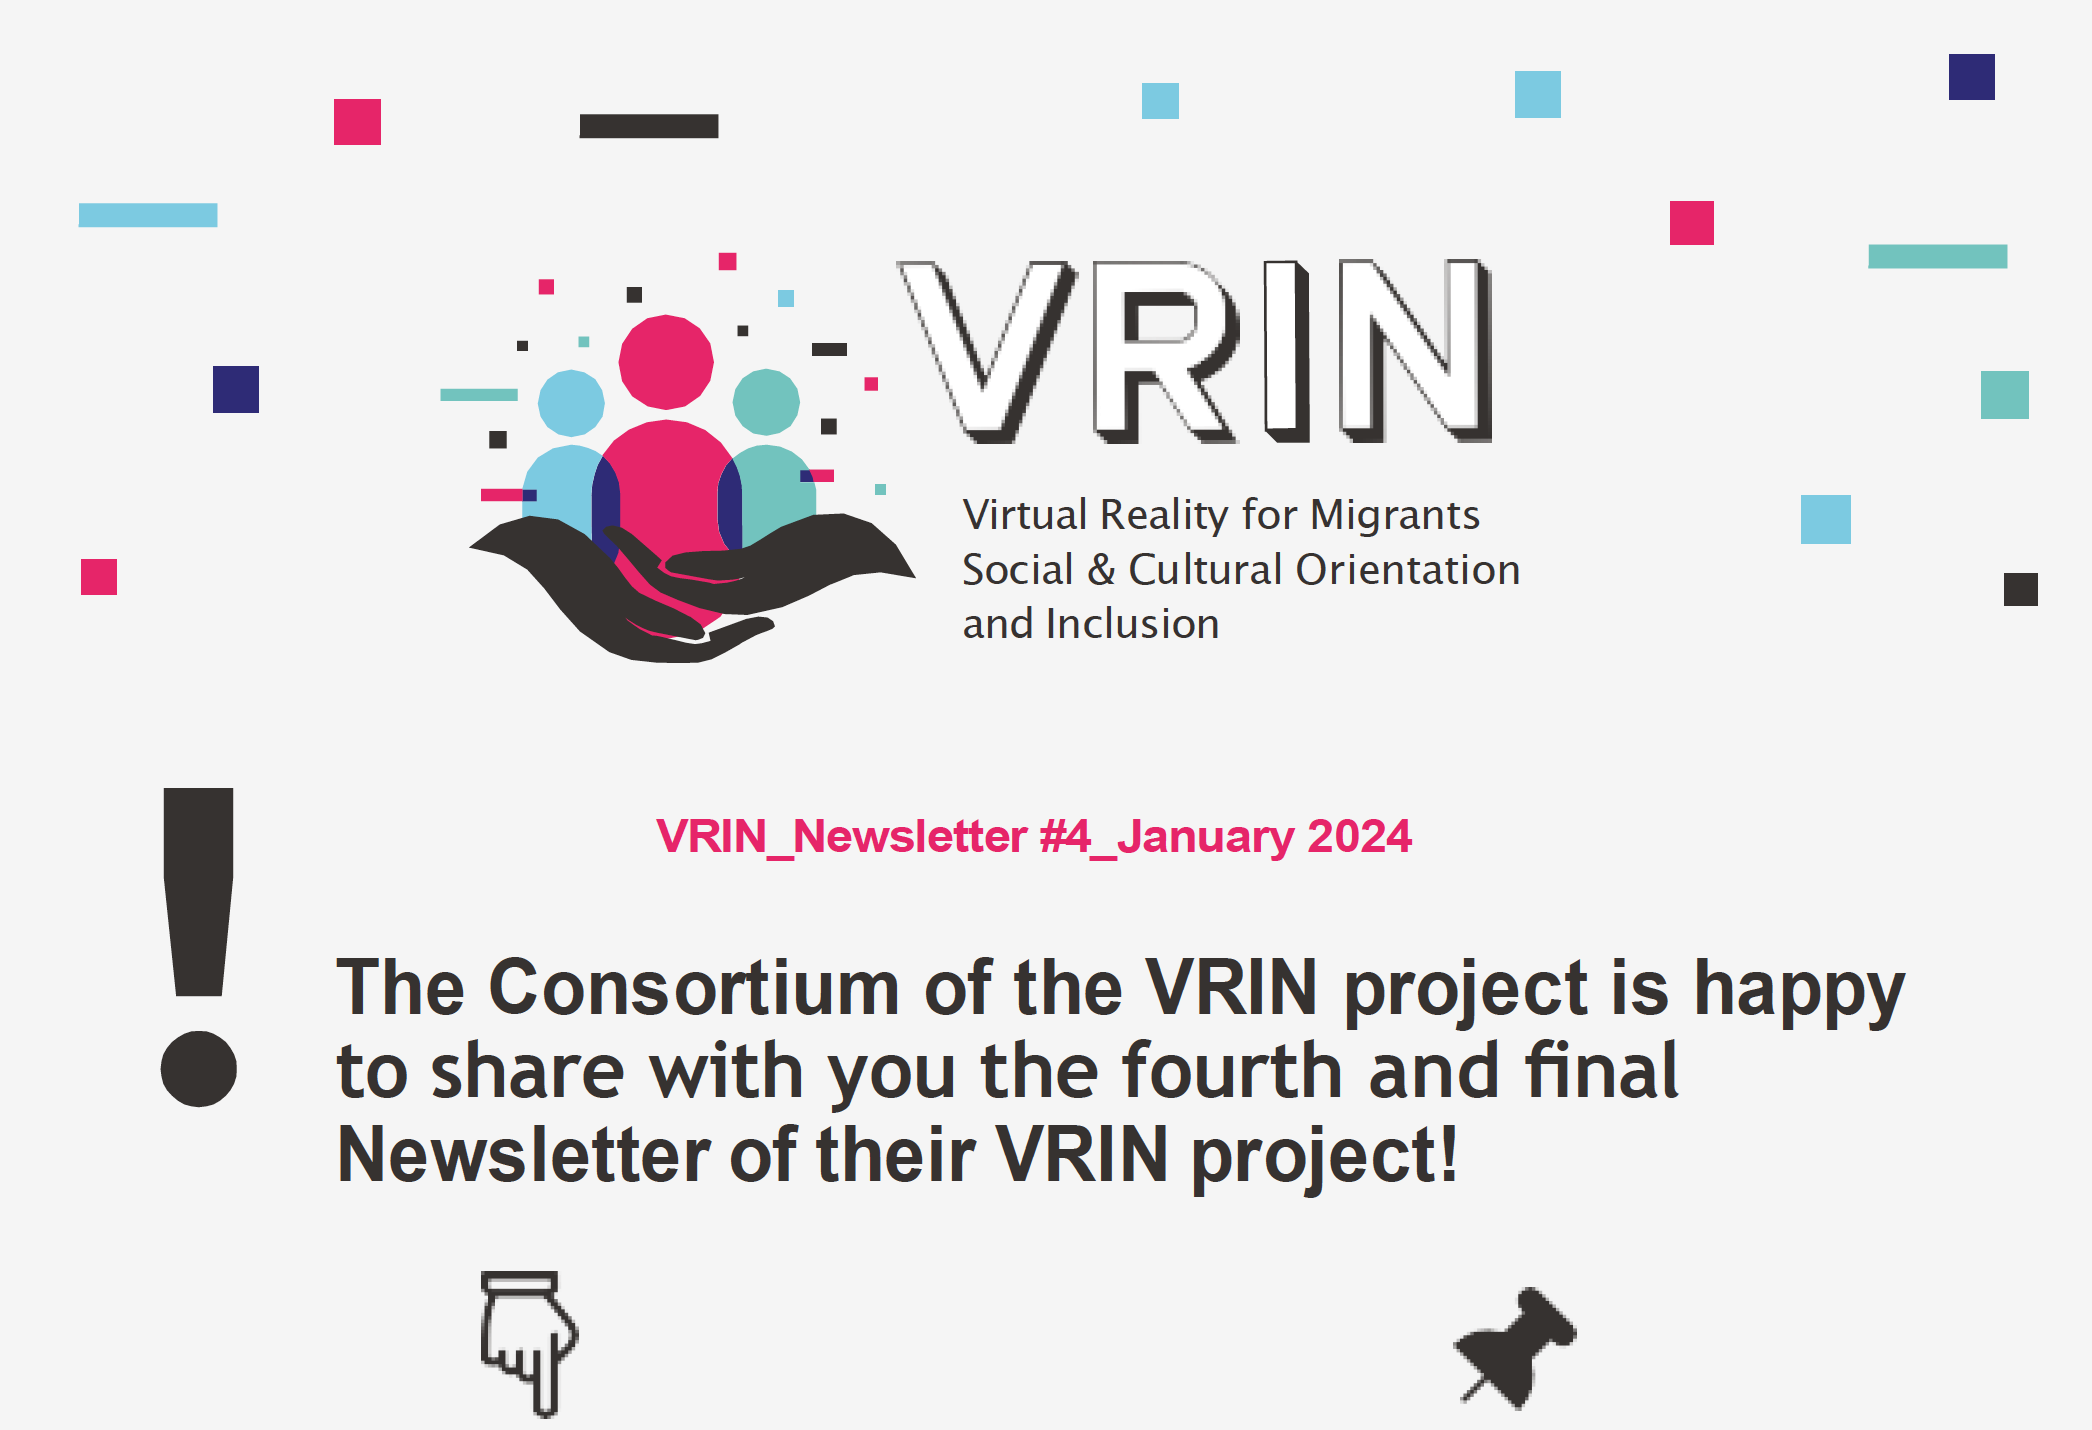 The Consortium of the VRIN project is happy to share with you the fourth and final Newsletter of their VRIN project!